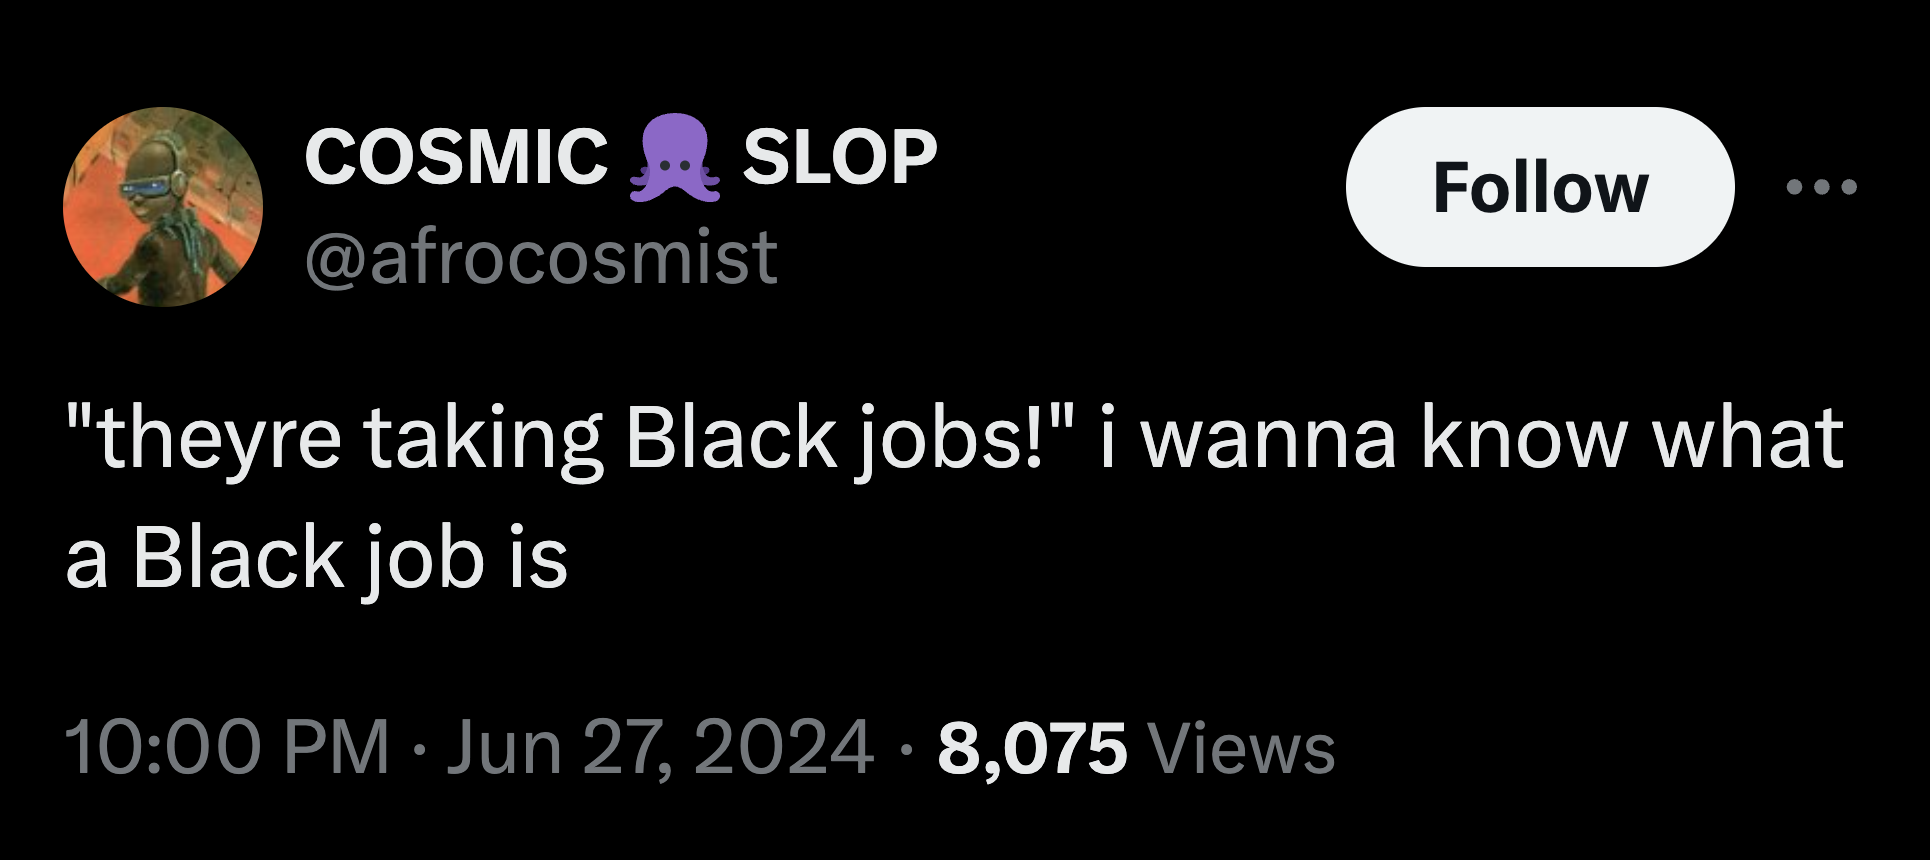 screenshot - Cosmic Slop "theyre taking Black jobs!" i wanna know what a Black job is 8,075 Views